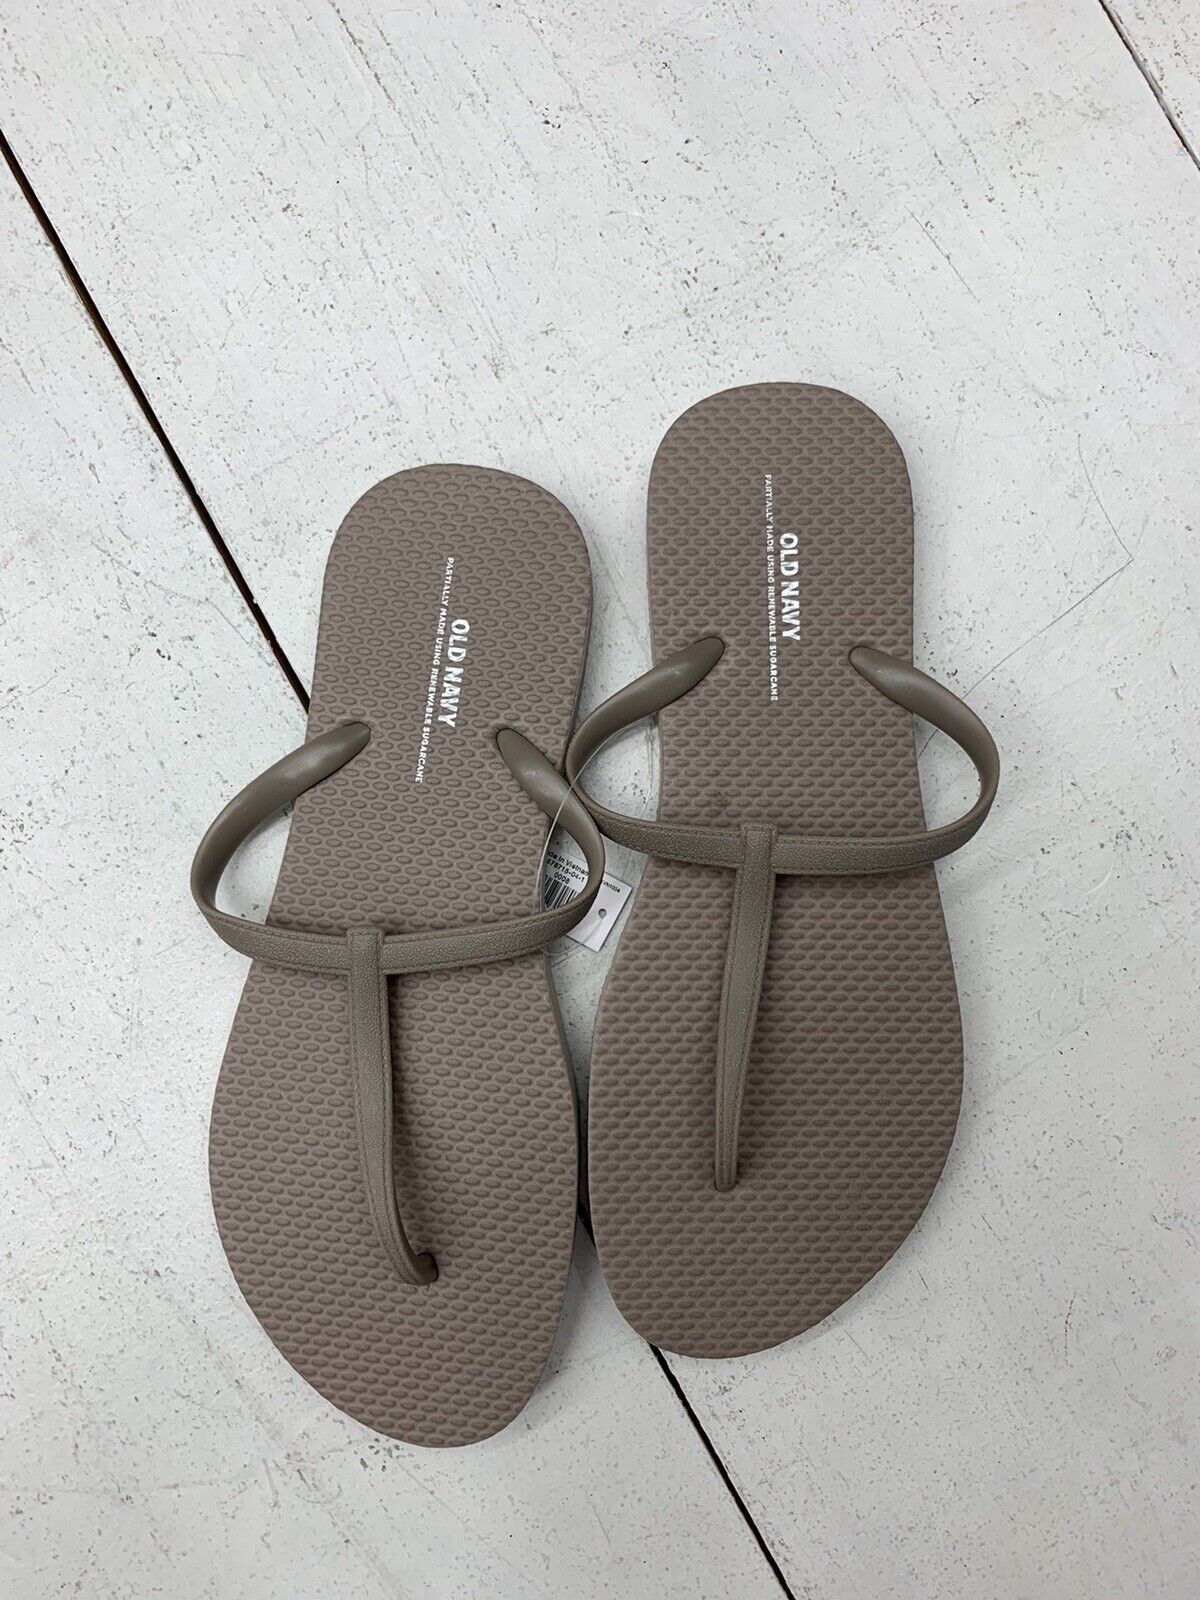 Sandals Flip Flops By Old Navy Size: 8